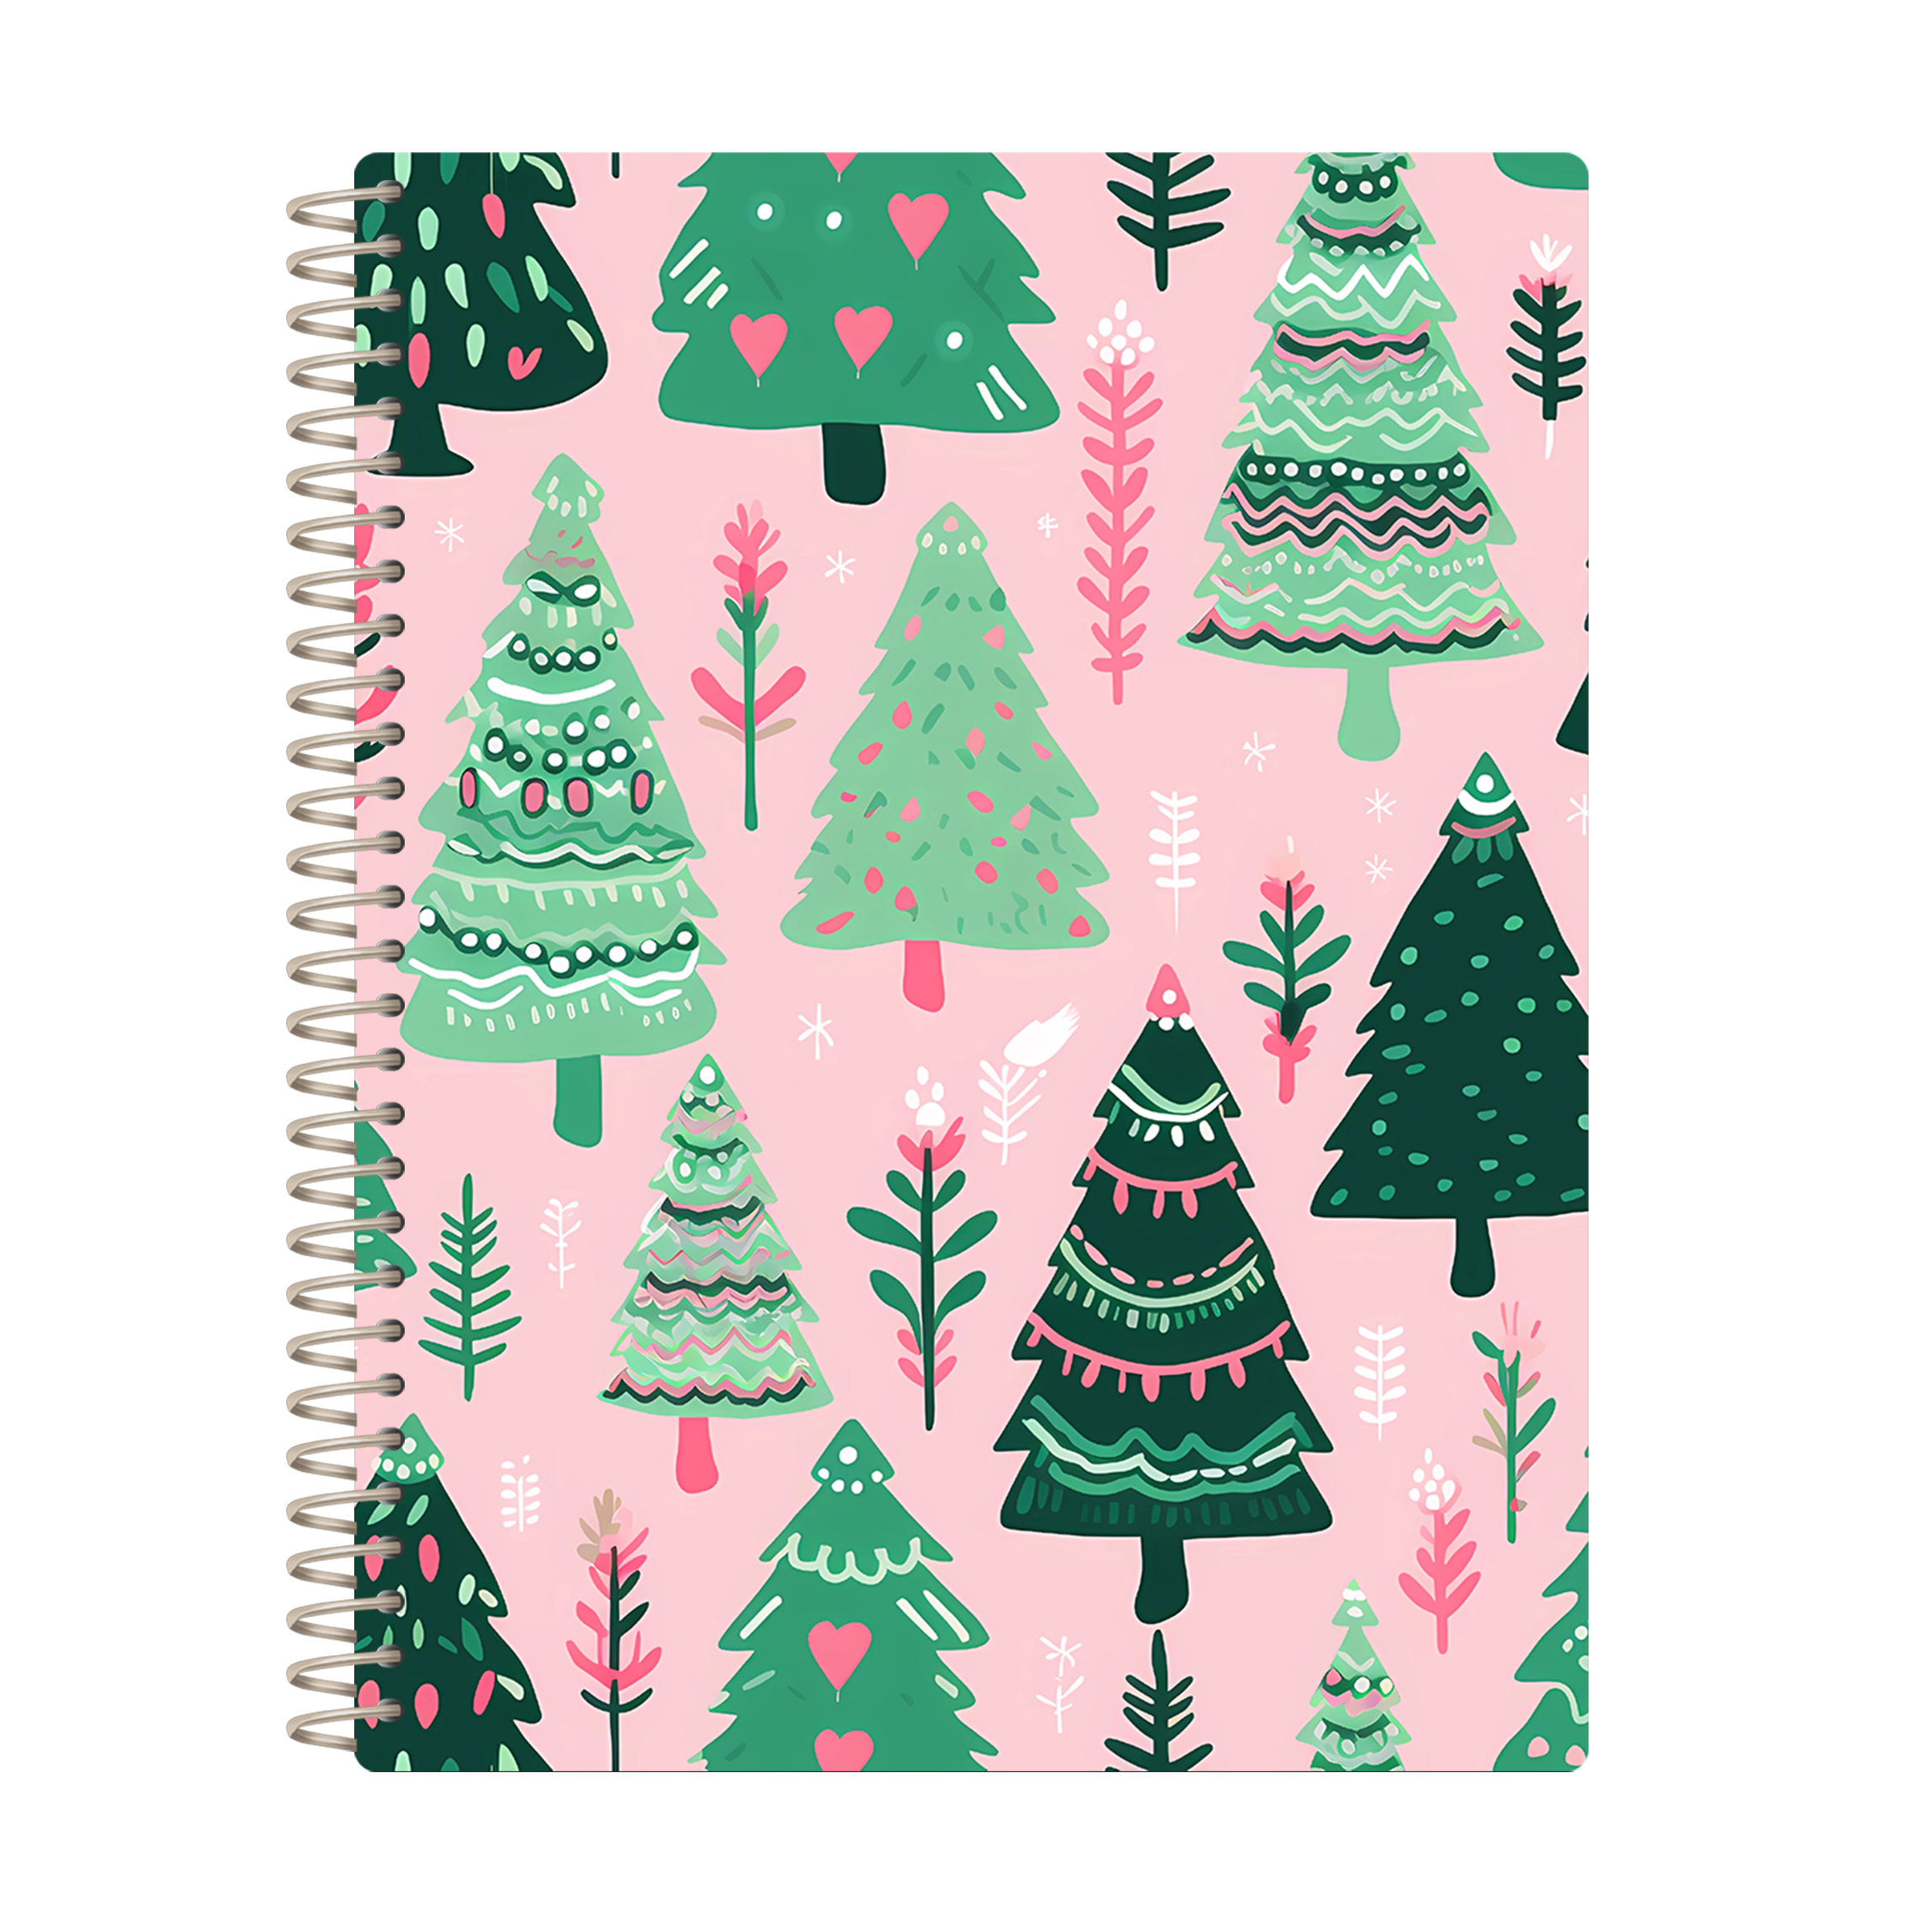 Christmas Colorbook 10 - PINK GREEN TREES